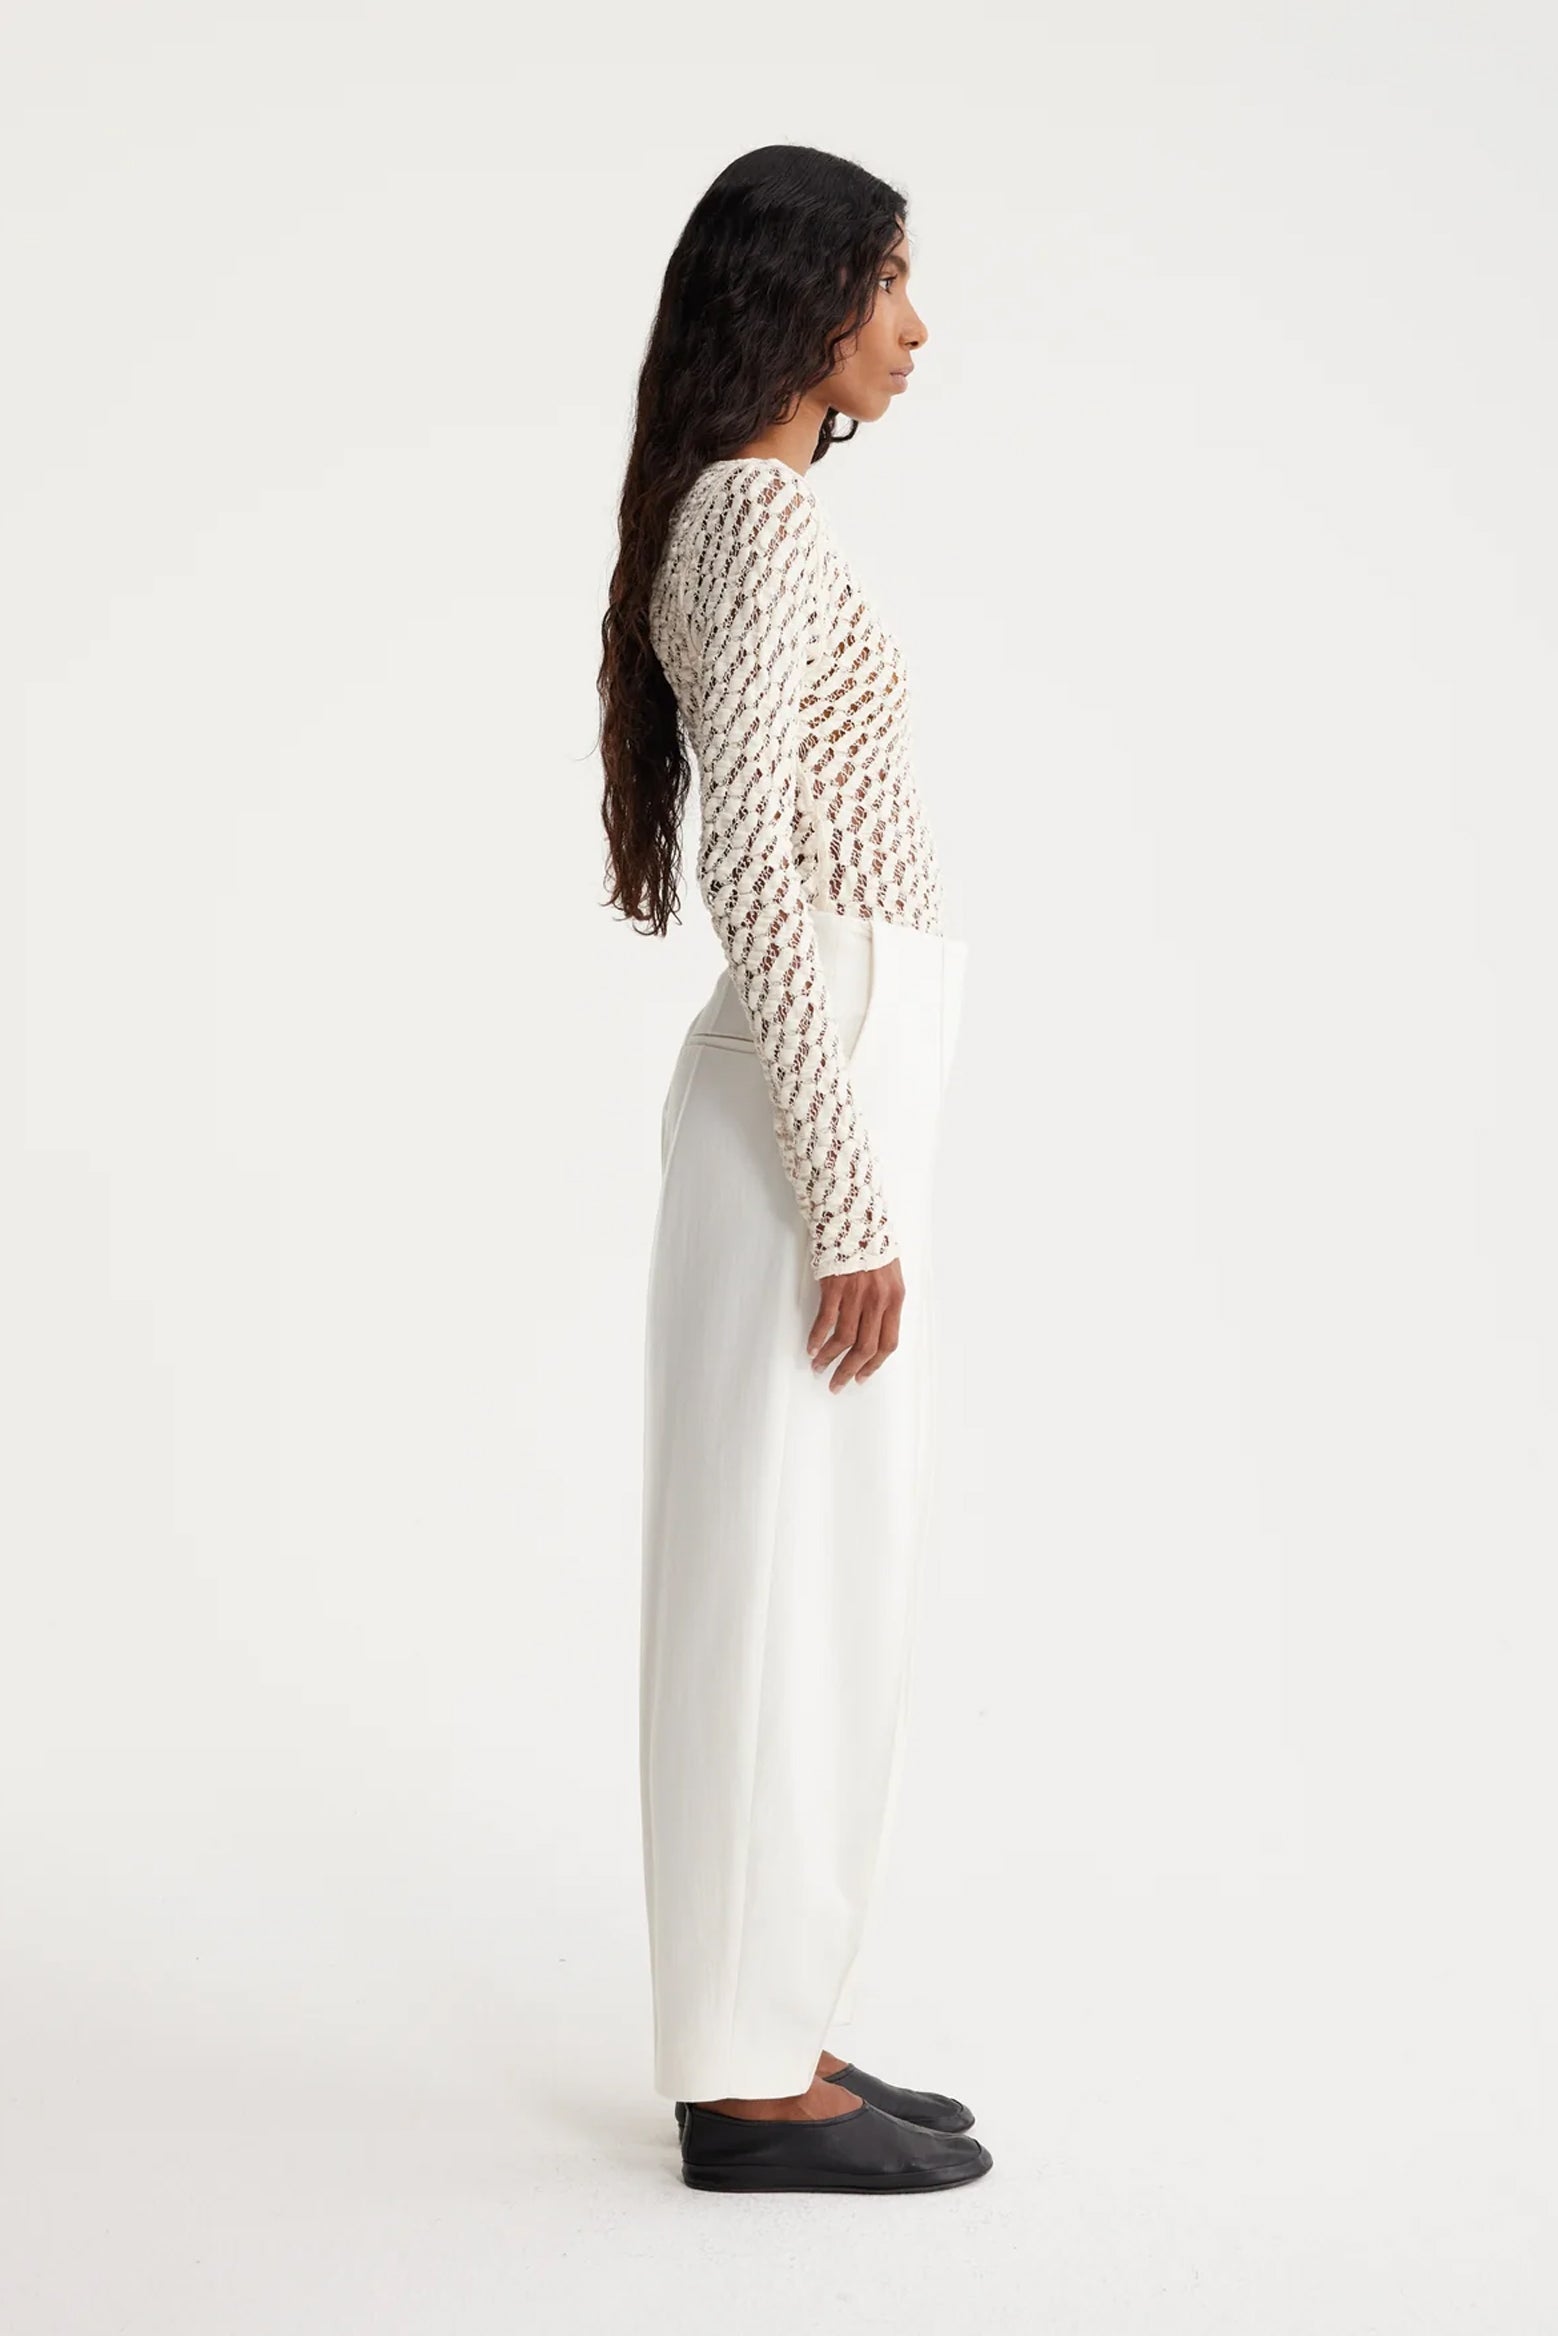 Rohe Lace Boat Neck Top in Cream available at The New Trend Australia.